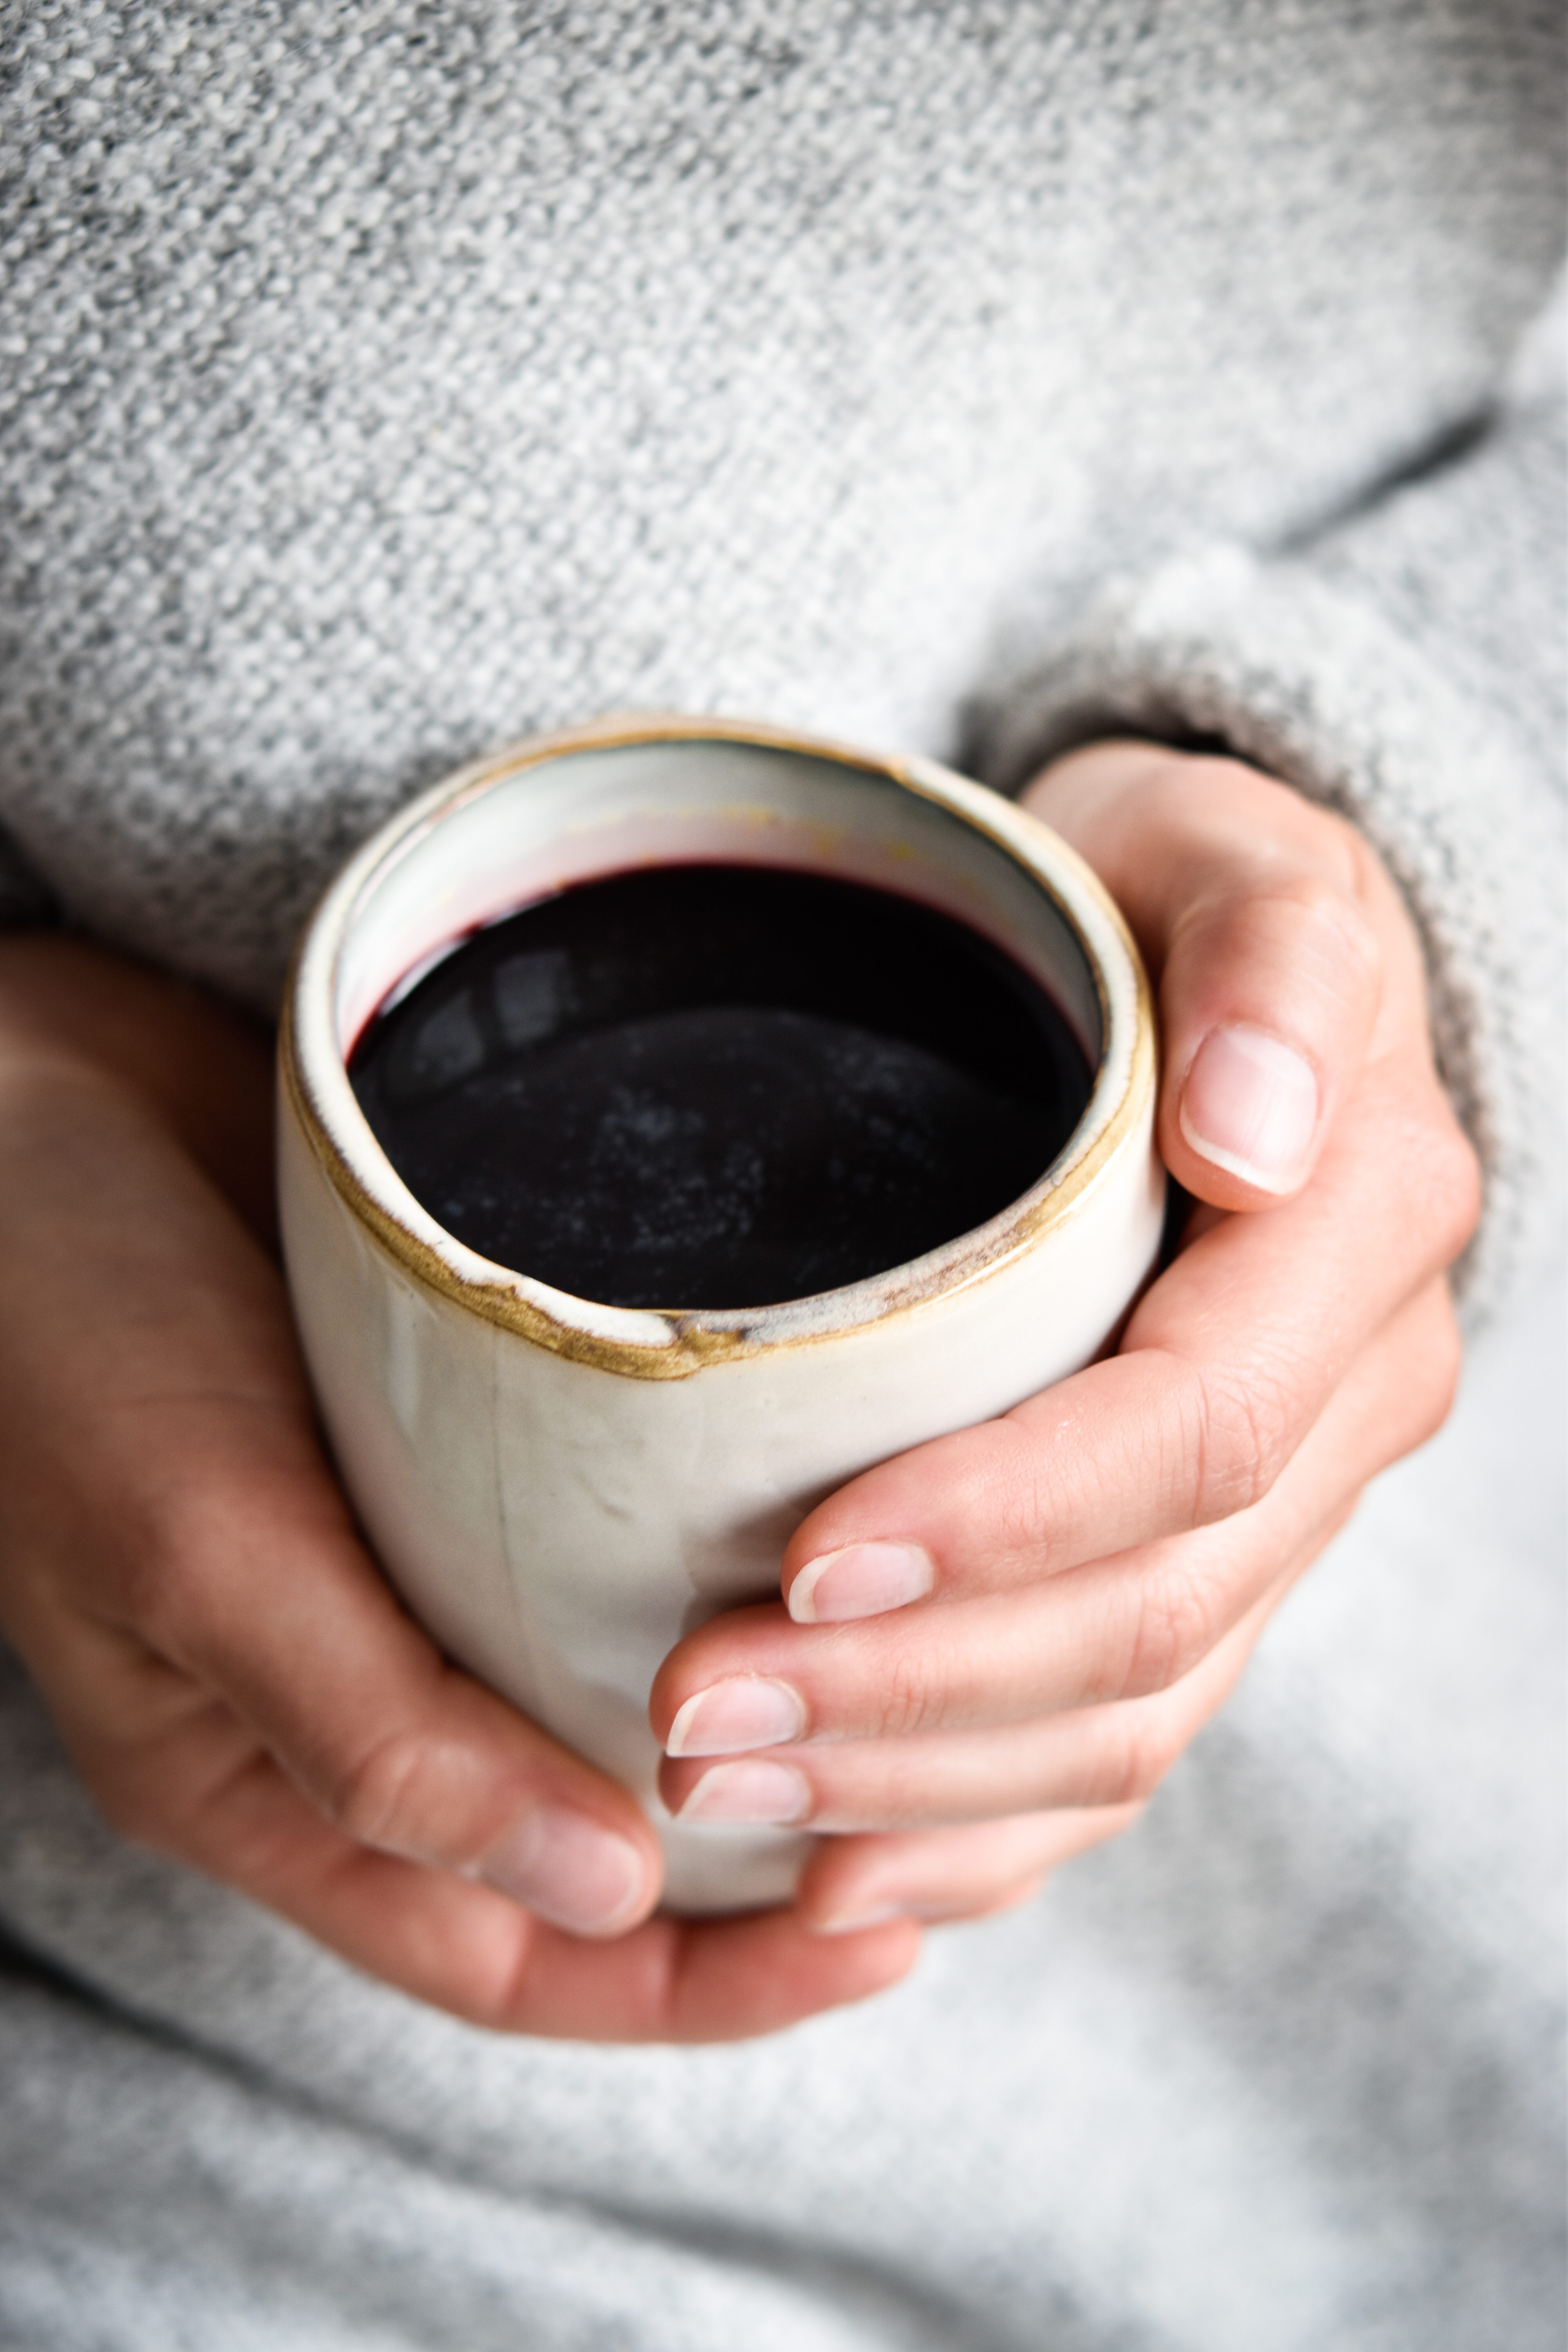 Elderberry-Turmeric-Drink and tips to stay healthy and fit during cold season